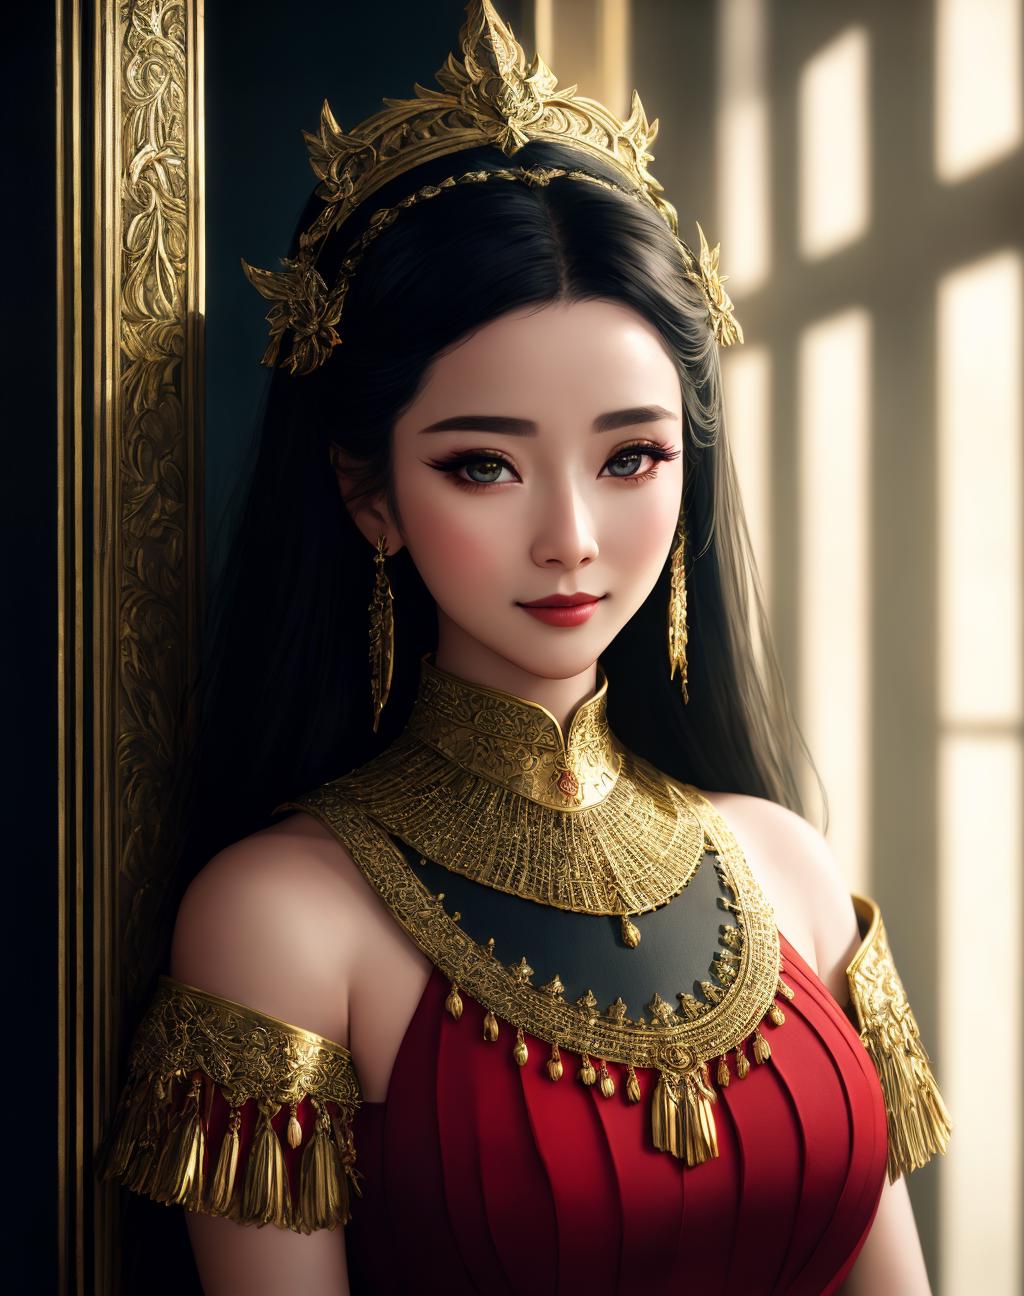 Artistic Eastern Fantasy Armor and Dress image by EDG